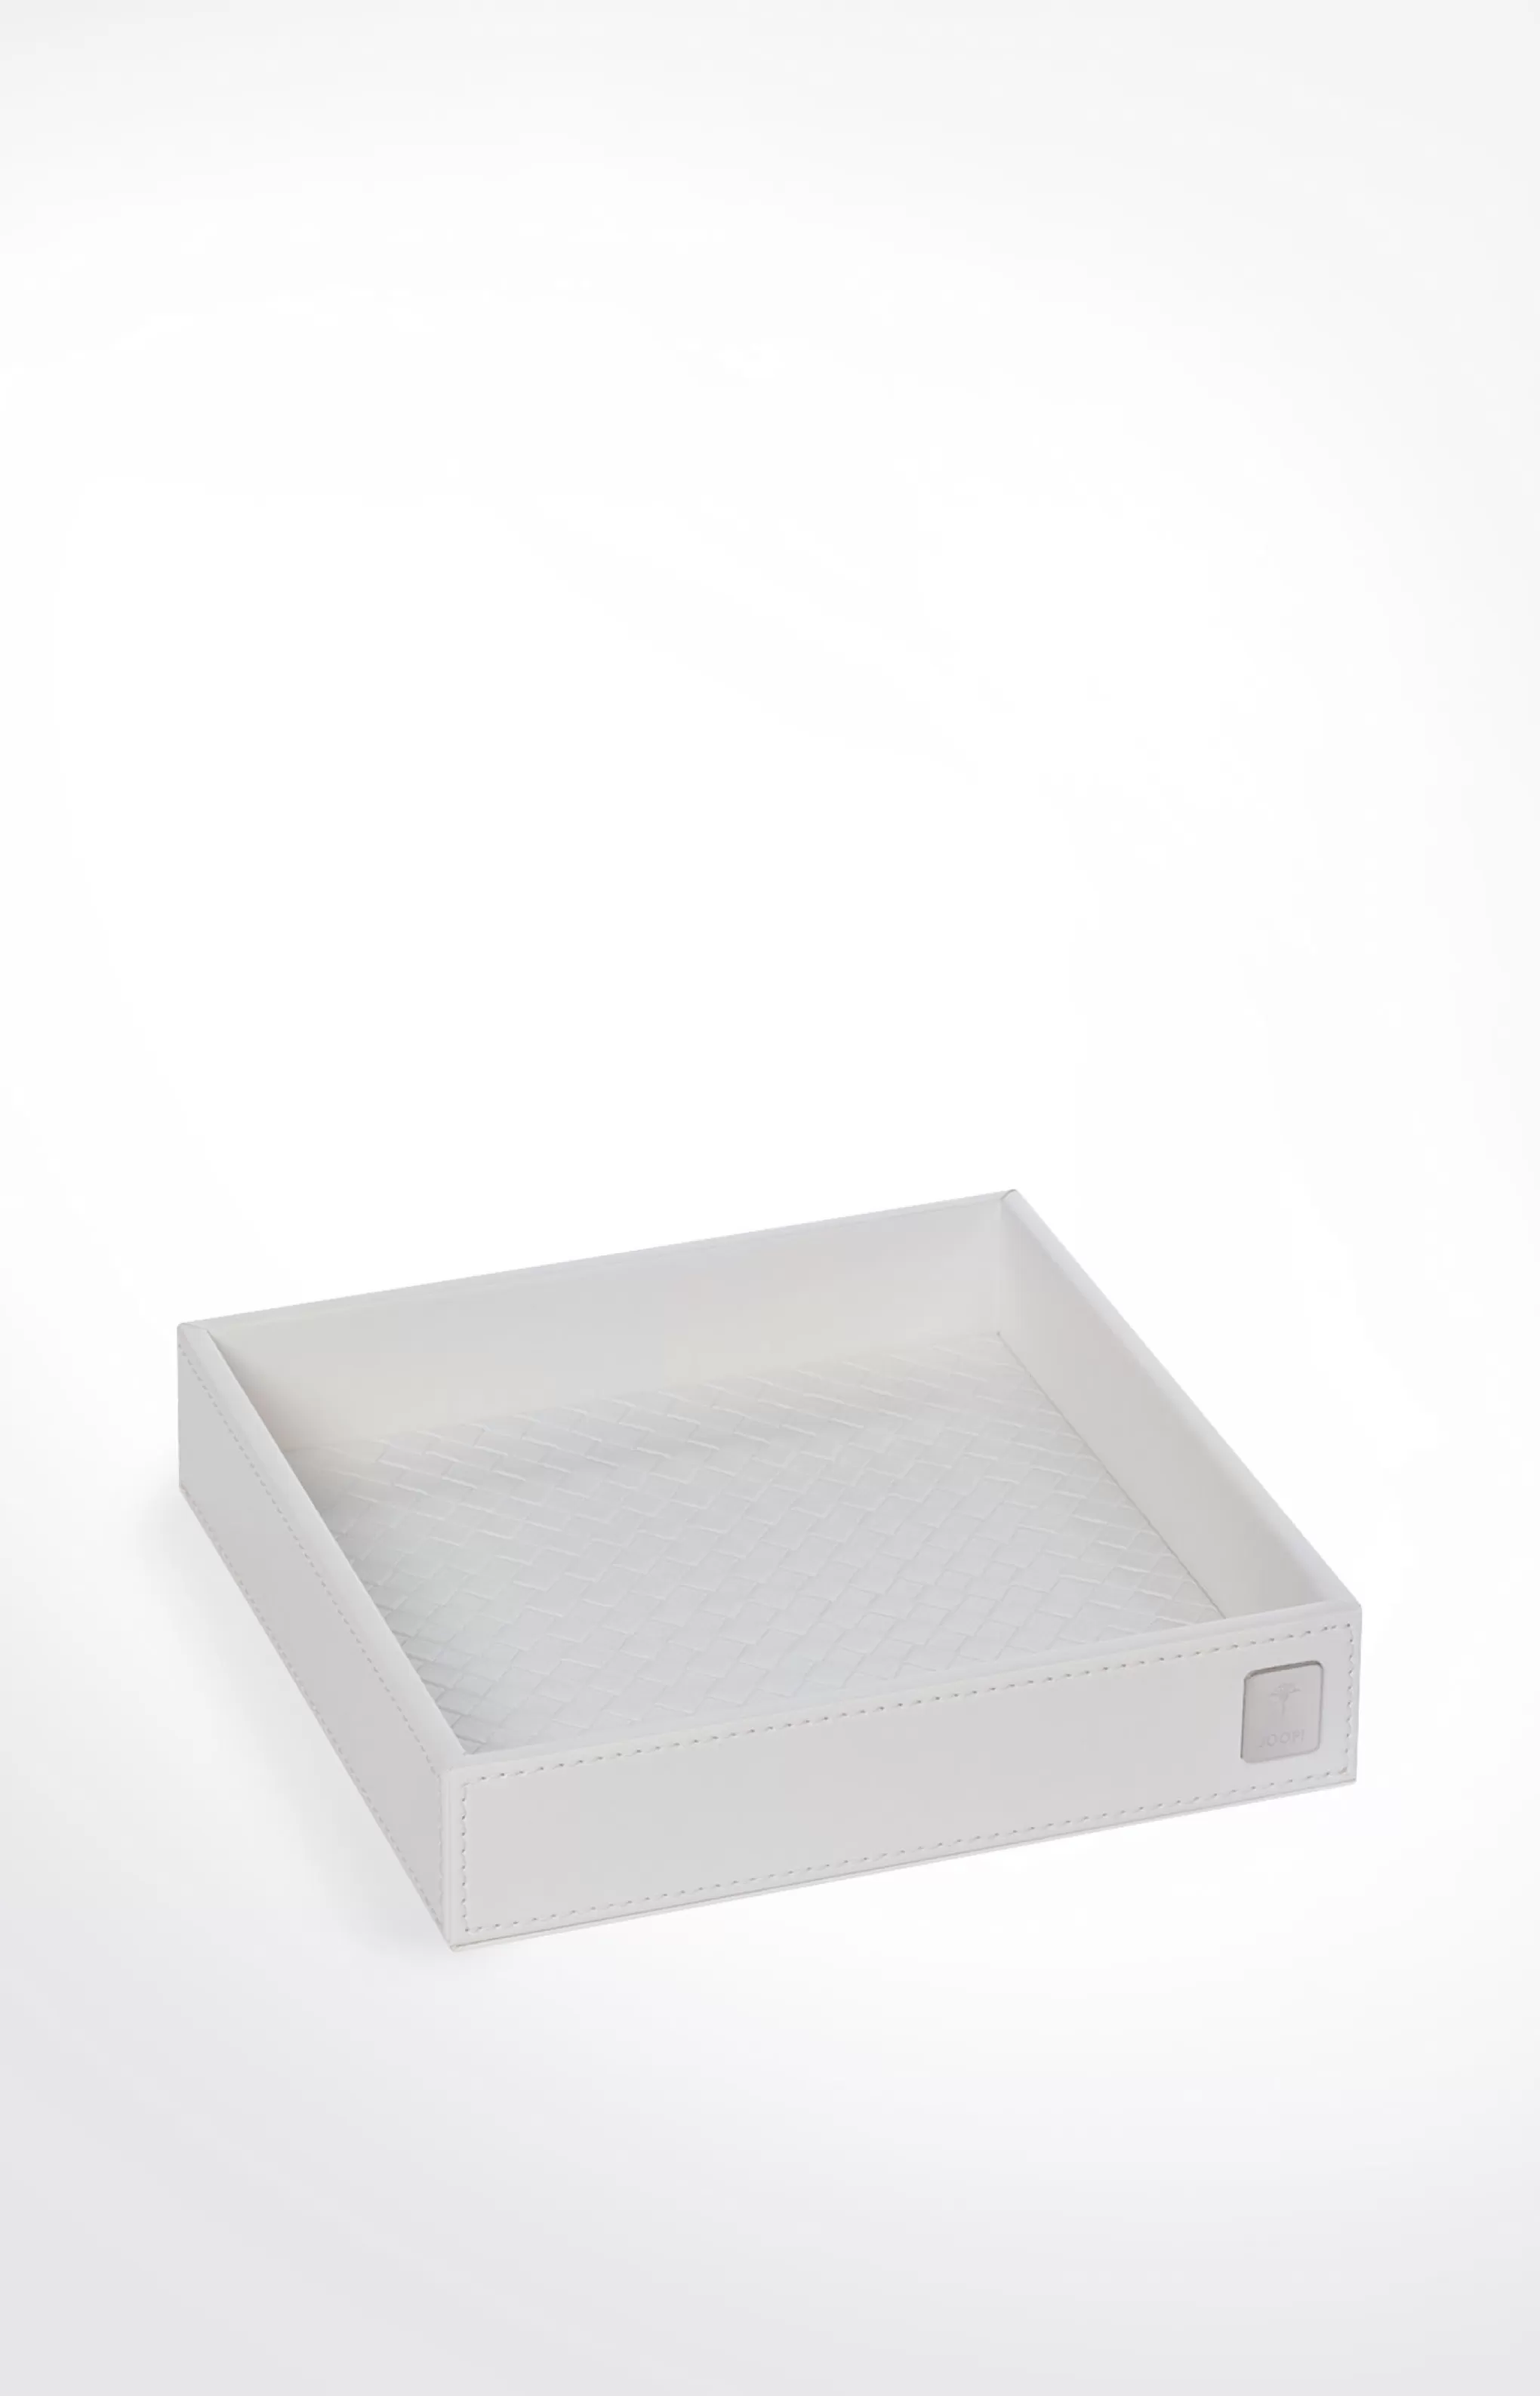 Bathroom Accessories | Discover Everything*JOOP Bathroom Accessories | Discover Everything Bathline tray,